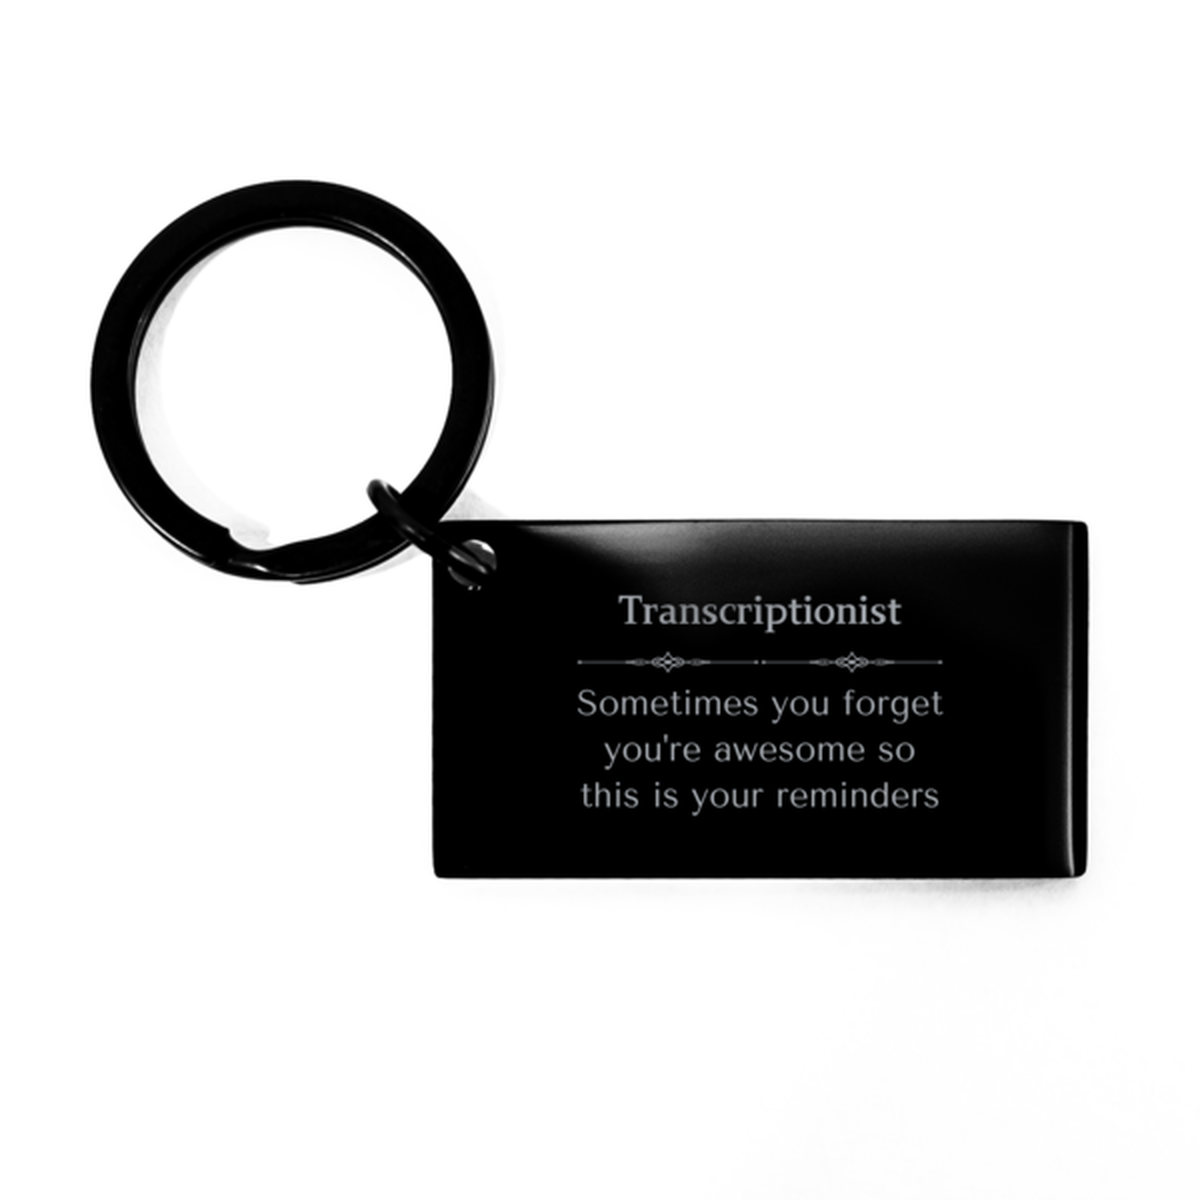 Sentimental Transcriptionist Keychain, Actor Sometimes you forget you're awesome so this is your reminders, Graduation Christmas Birthday Gifts for Transcriptionist, Men, Women, Coworkers